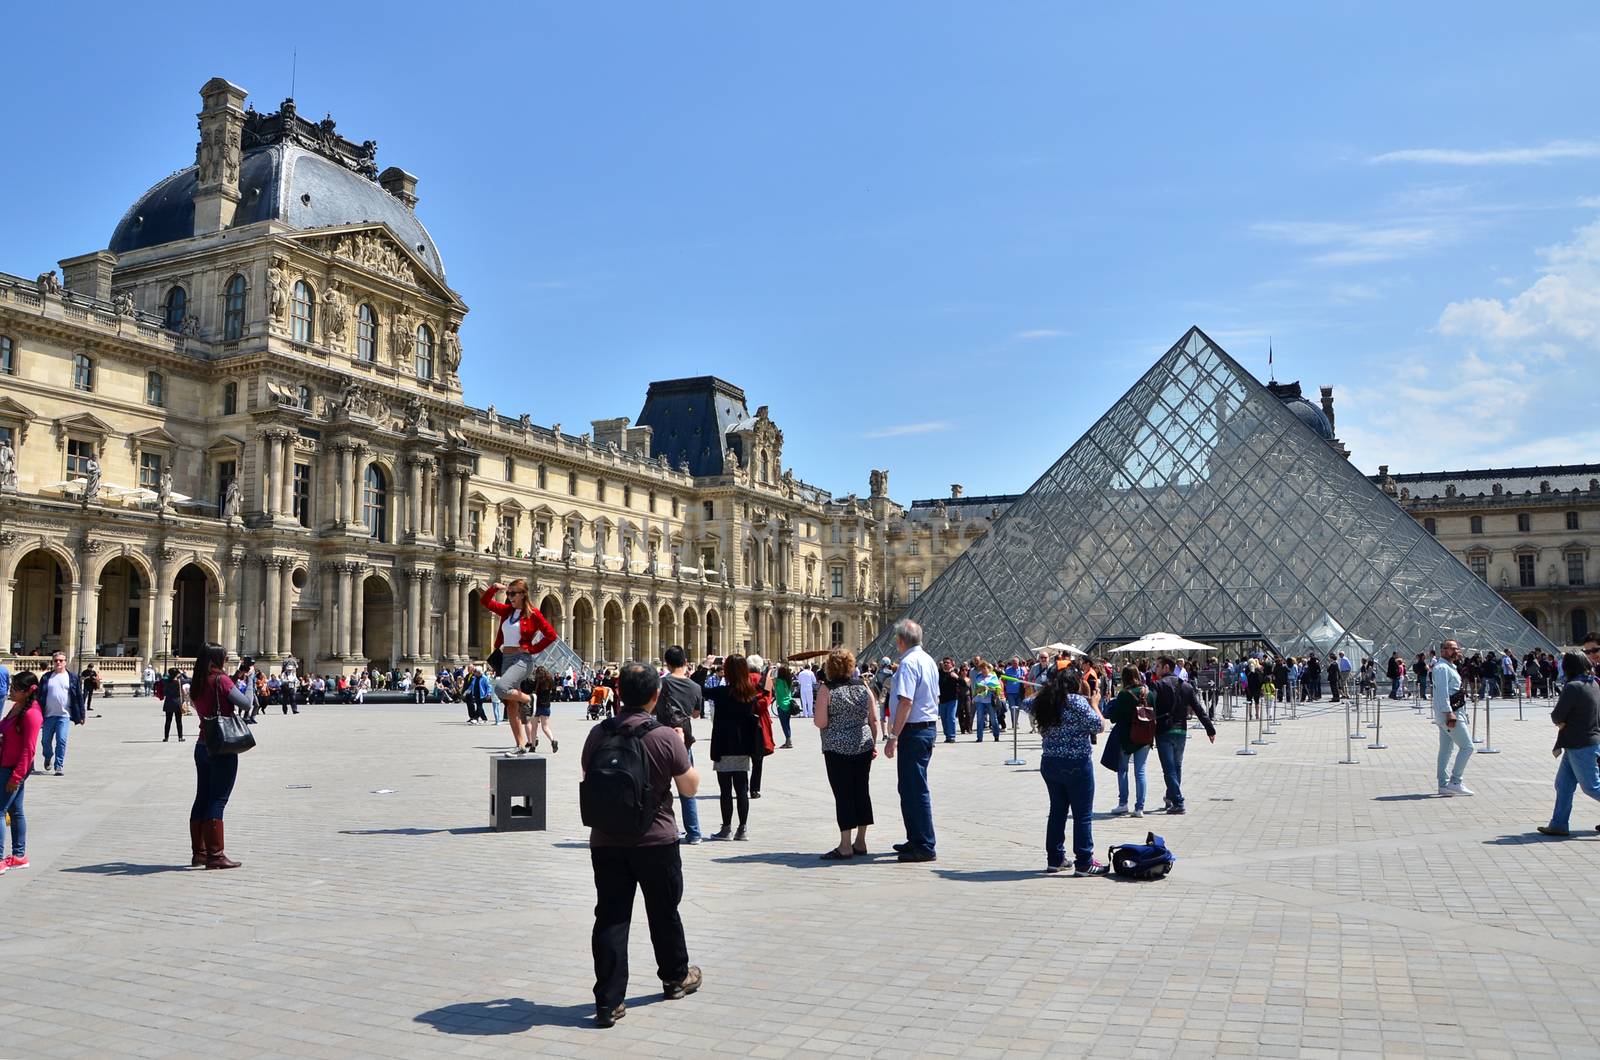 Paris, France - May 13, 2015: Tourist visit Louvre museum in Paris by siraanamwong